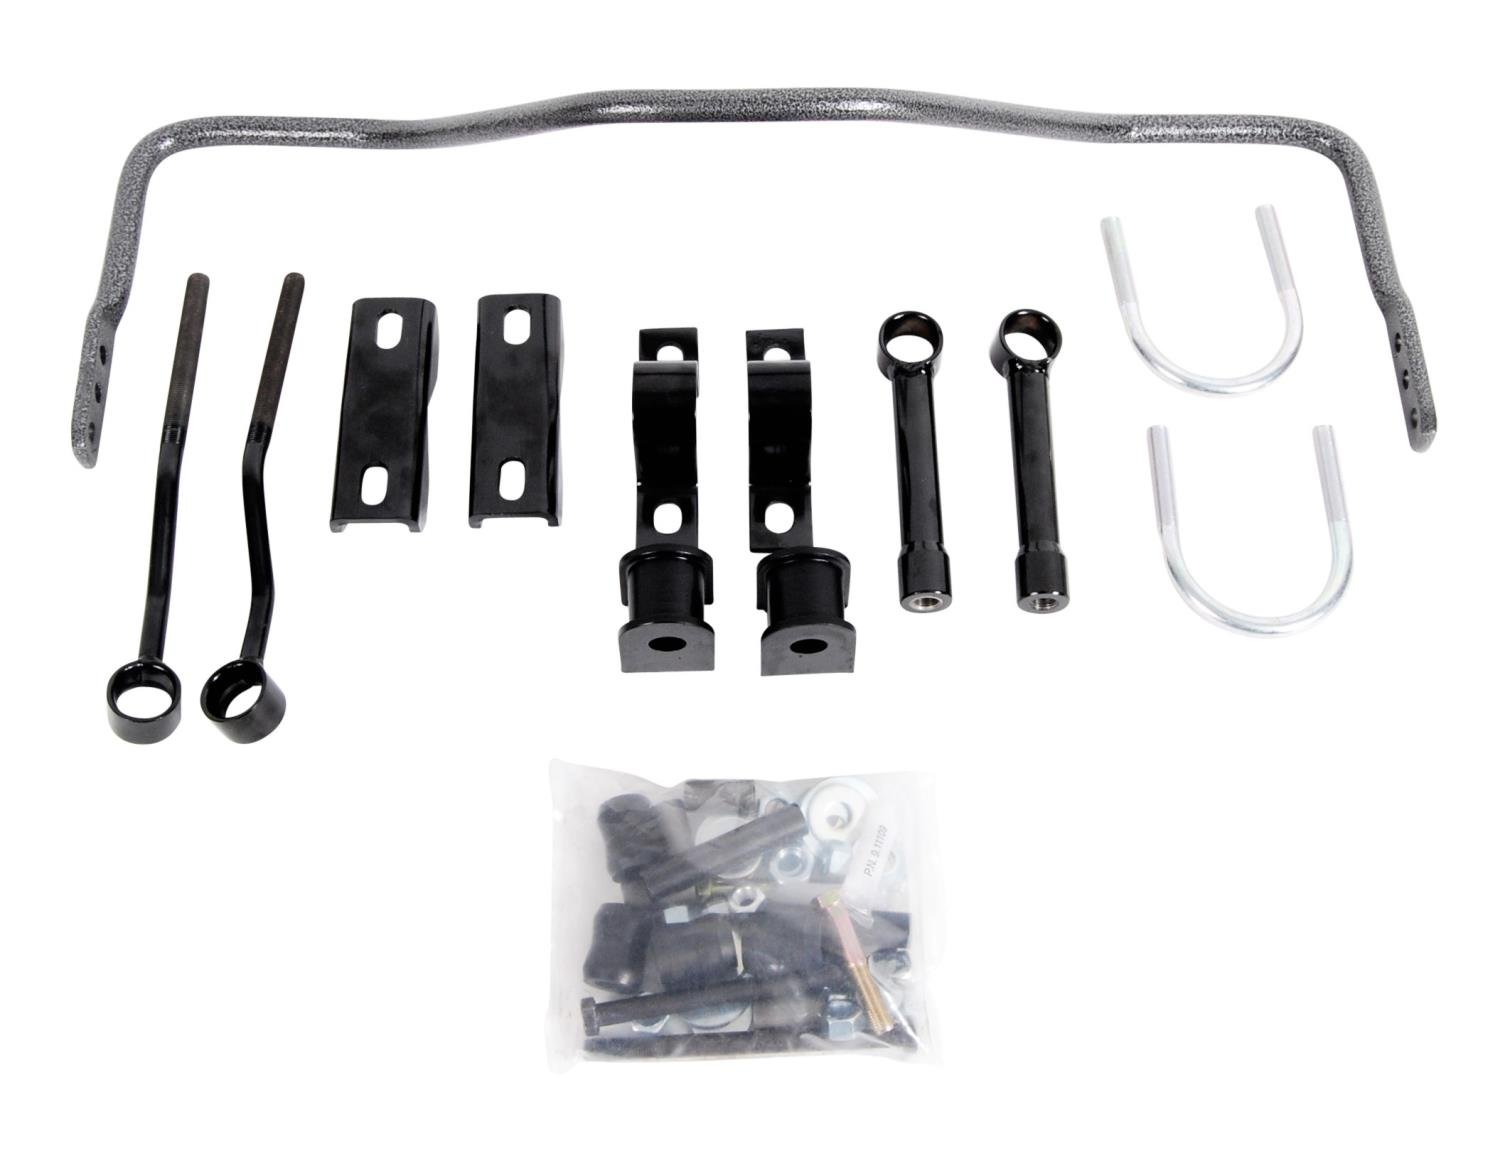 7830 Rear Sway Bar Kit for 1966-1977 Ford Bronco 4WD with 0-4 in. Lift